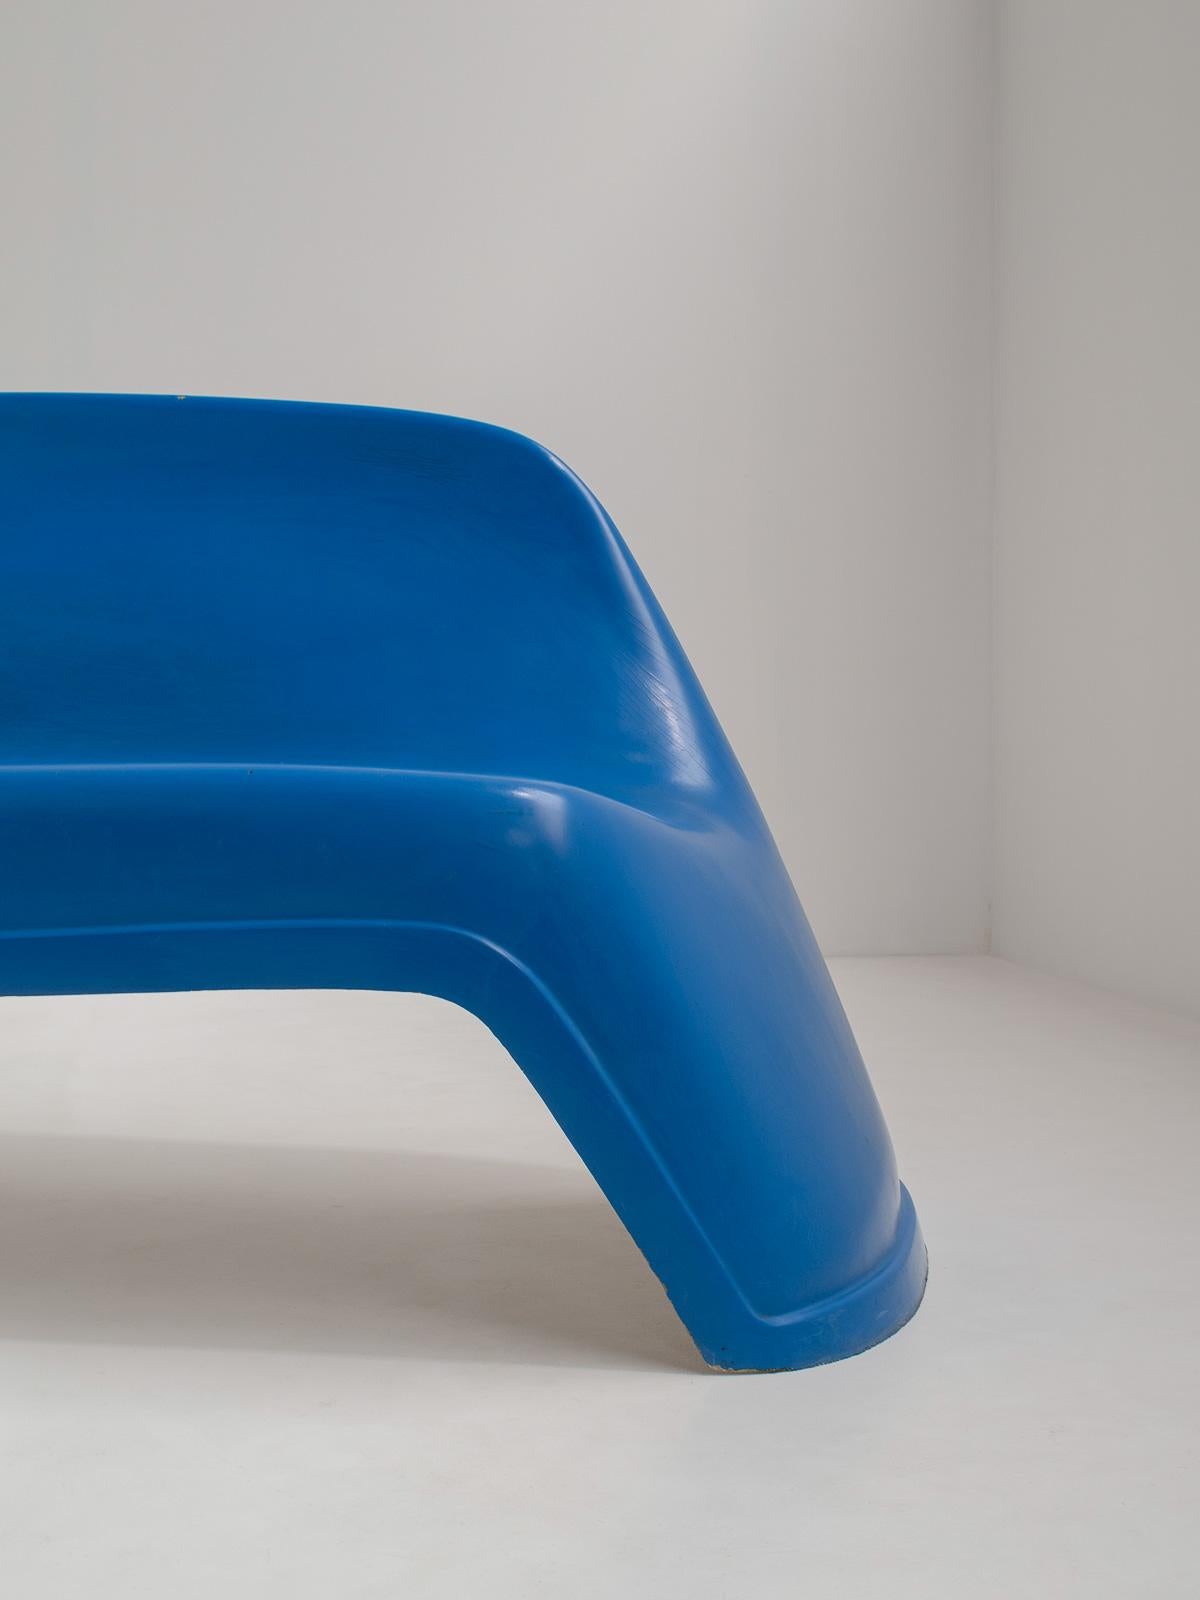 Blue Fiberglass Bench by Walter Papst for Wilkhahn, Germany, 1960s For Sale 3